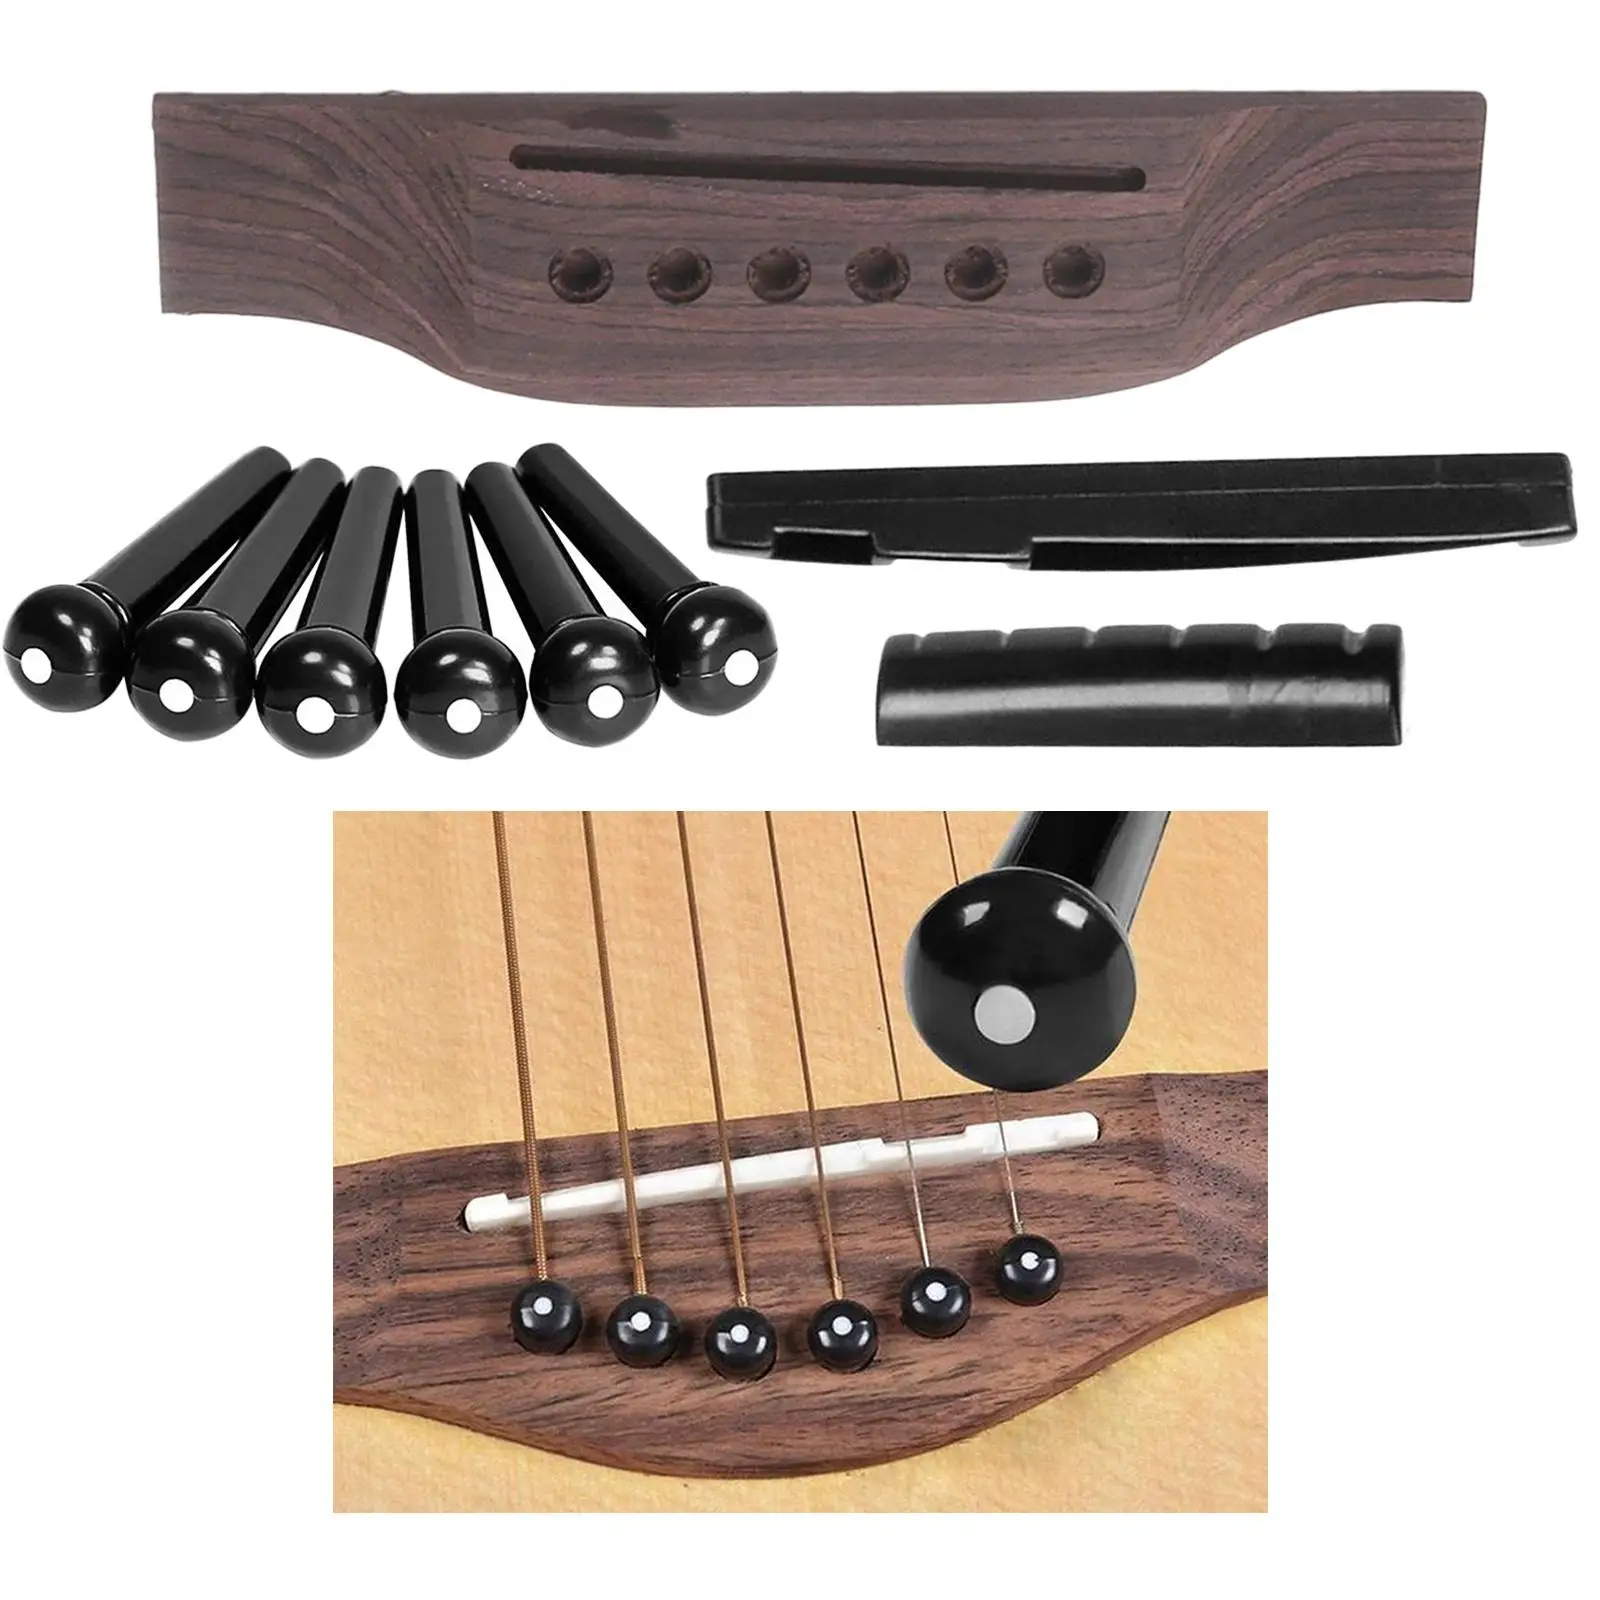 9 Pieces/kit Acoustic Guitar Bridge Replace with Pins Slotted Nut Saddle